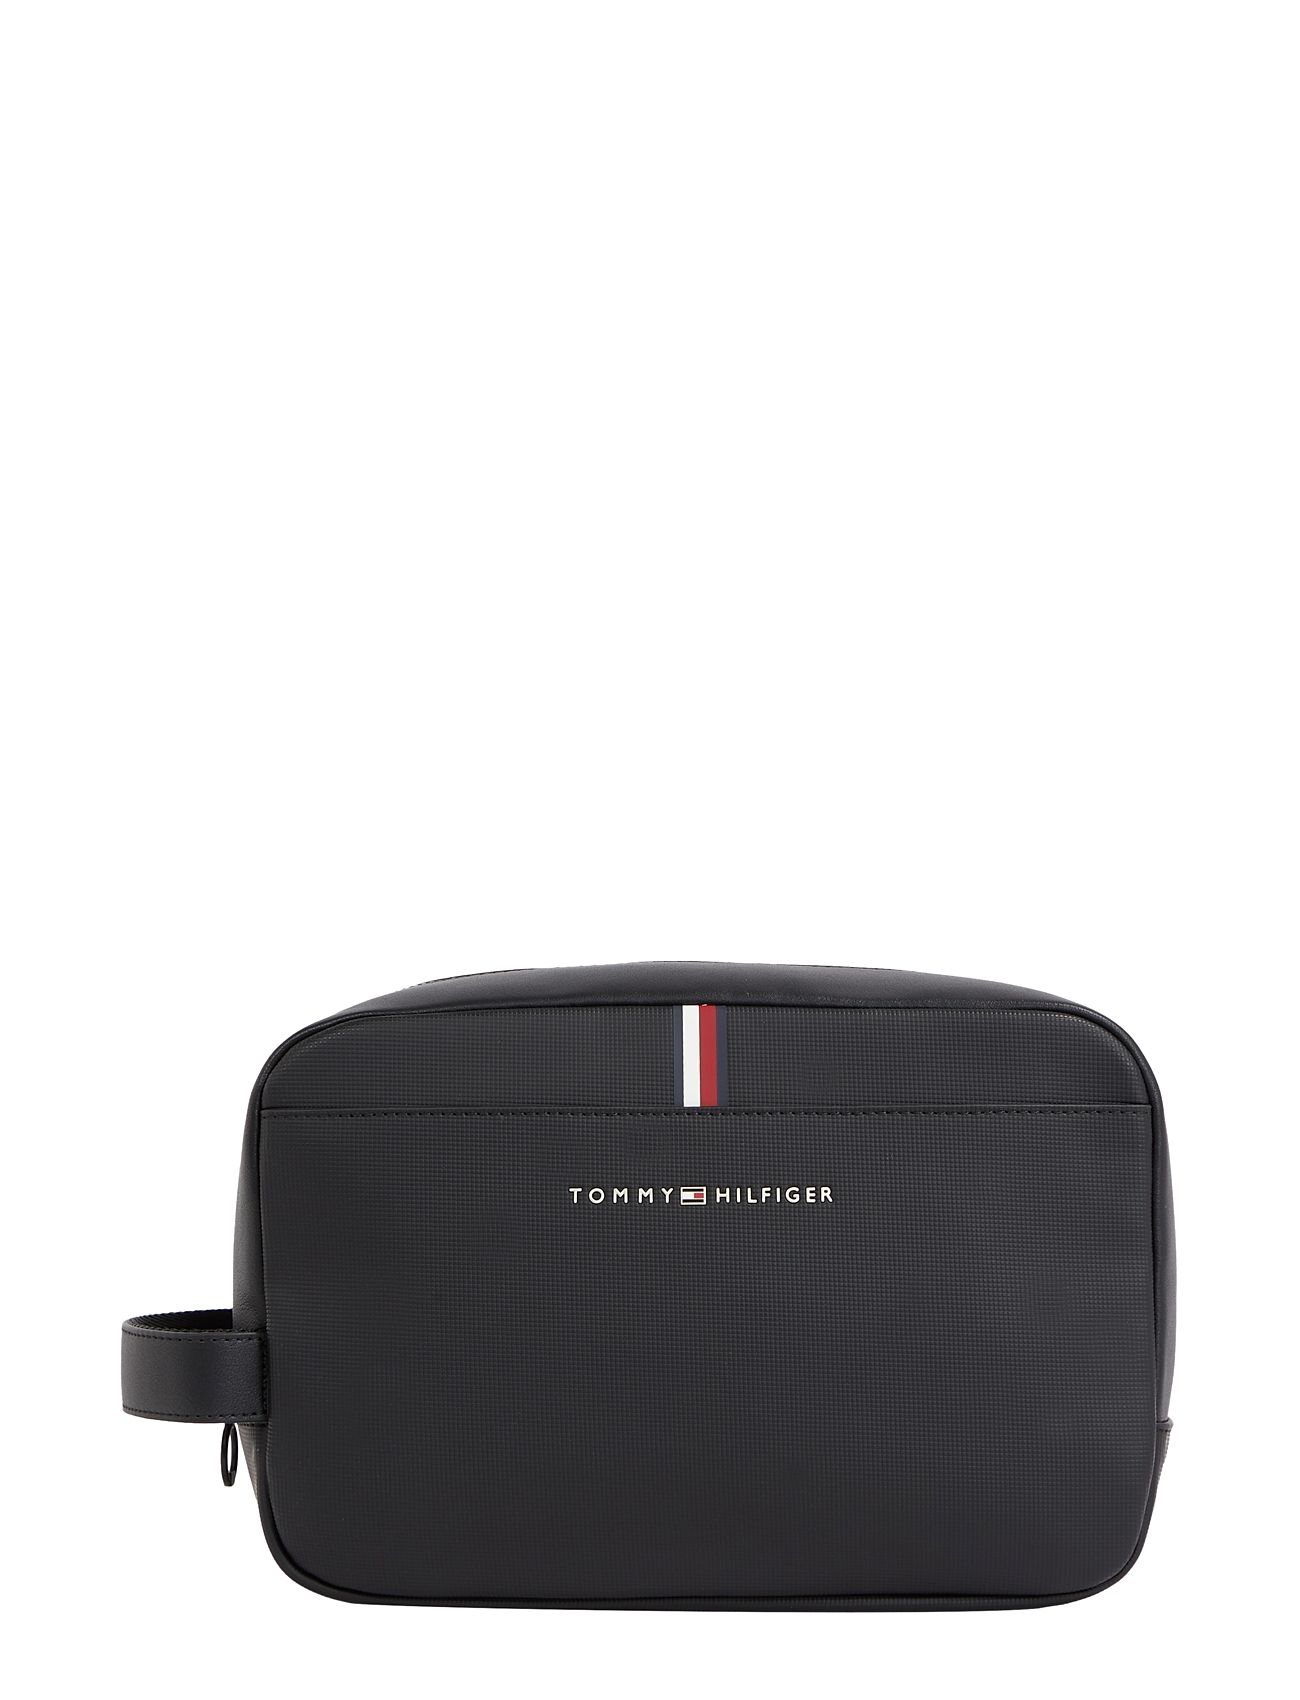 Tommy Th Essential Pique Washbag Toiletry bags - Boozt.com